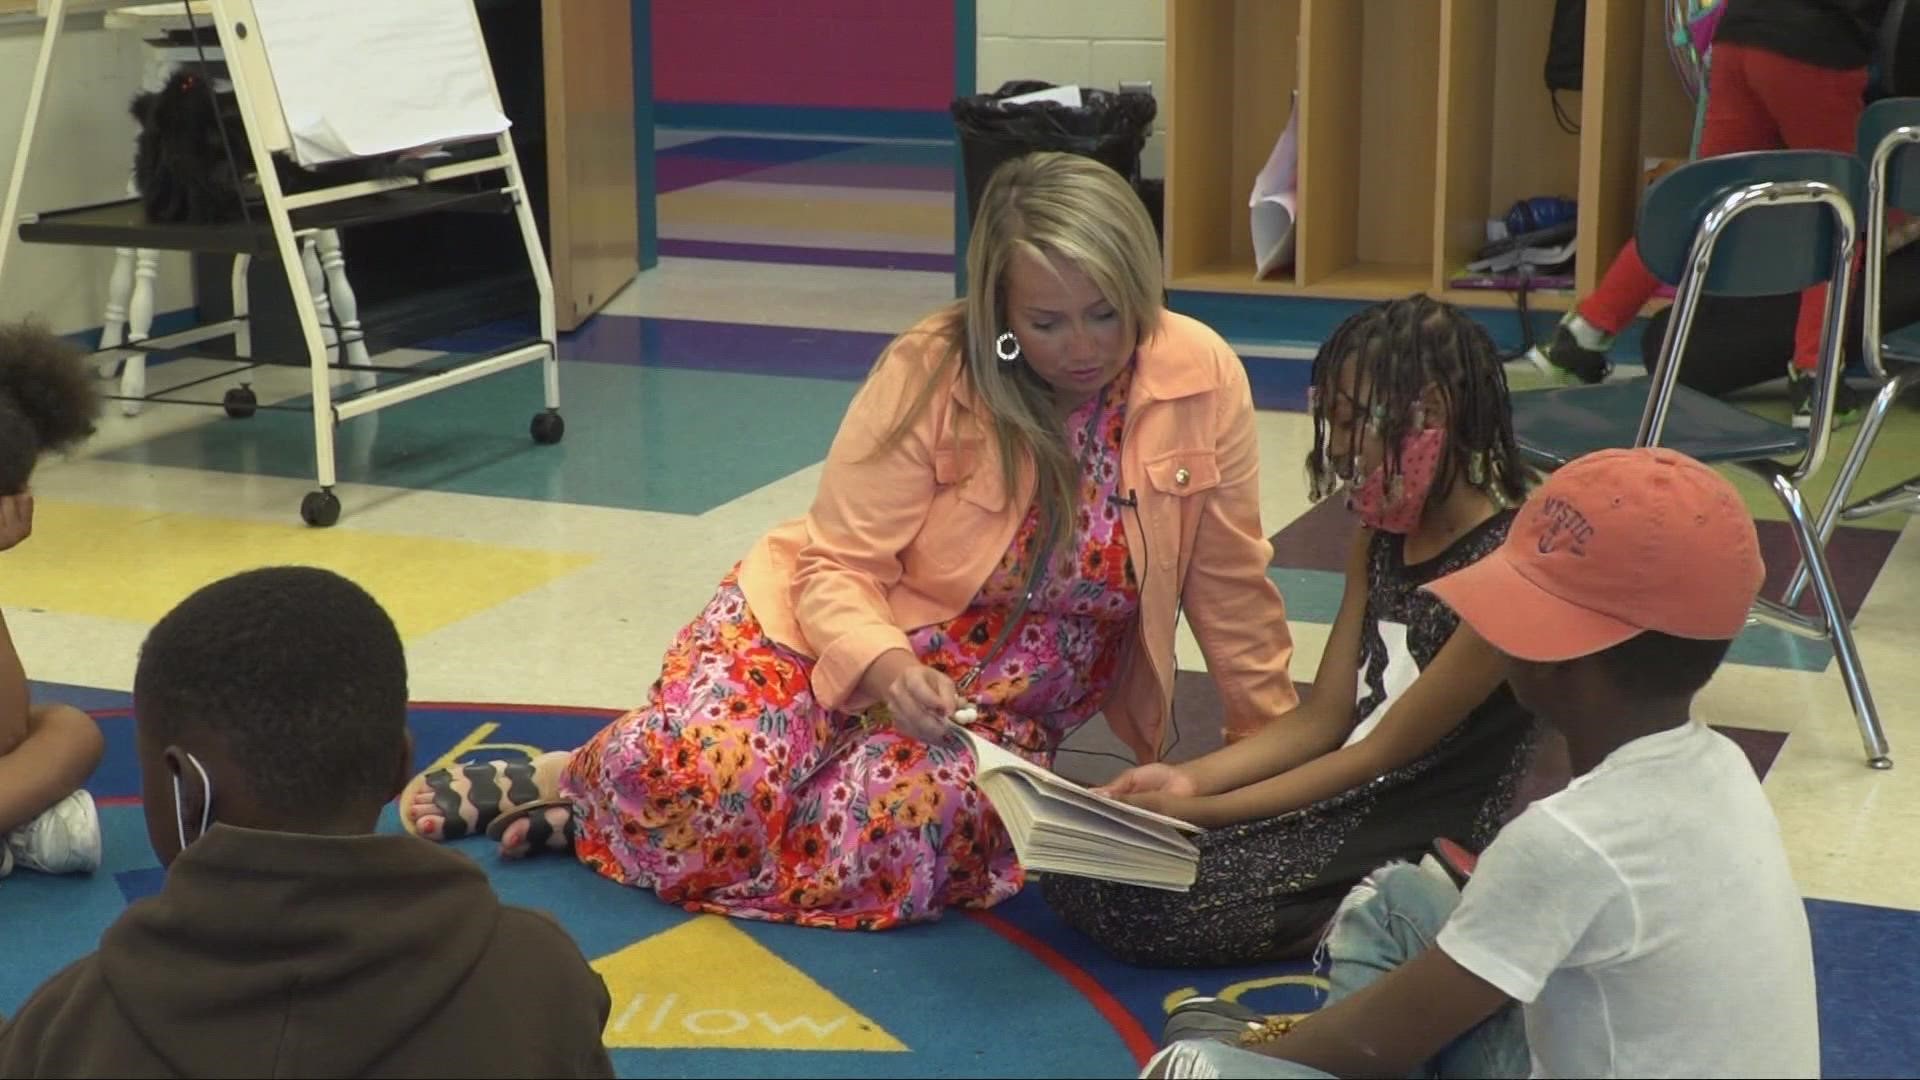 All school year, we've been following students at Charles Dickens Elementary in Cleveland. As summer break begins, here's an update on the 'Dickens Reads' program.